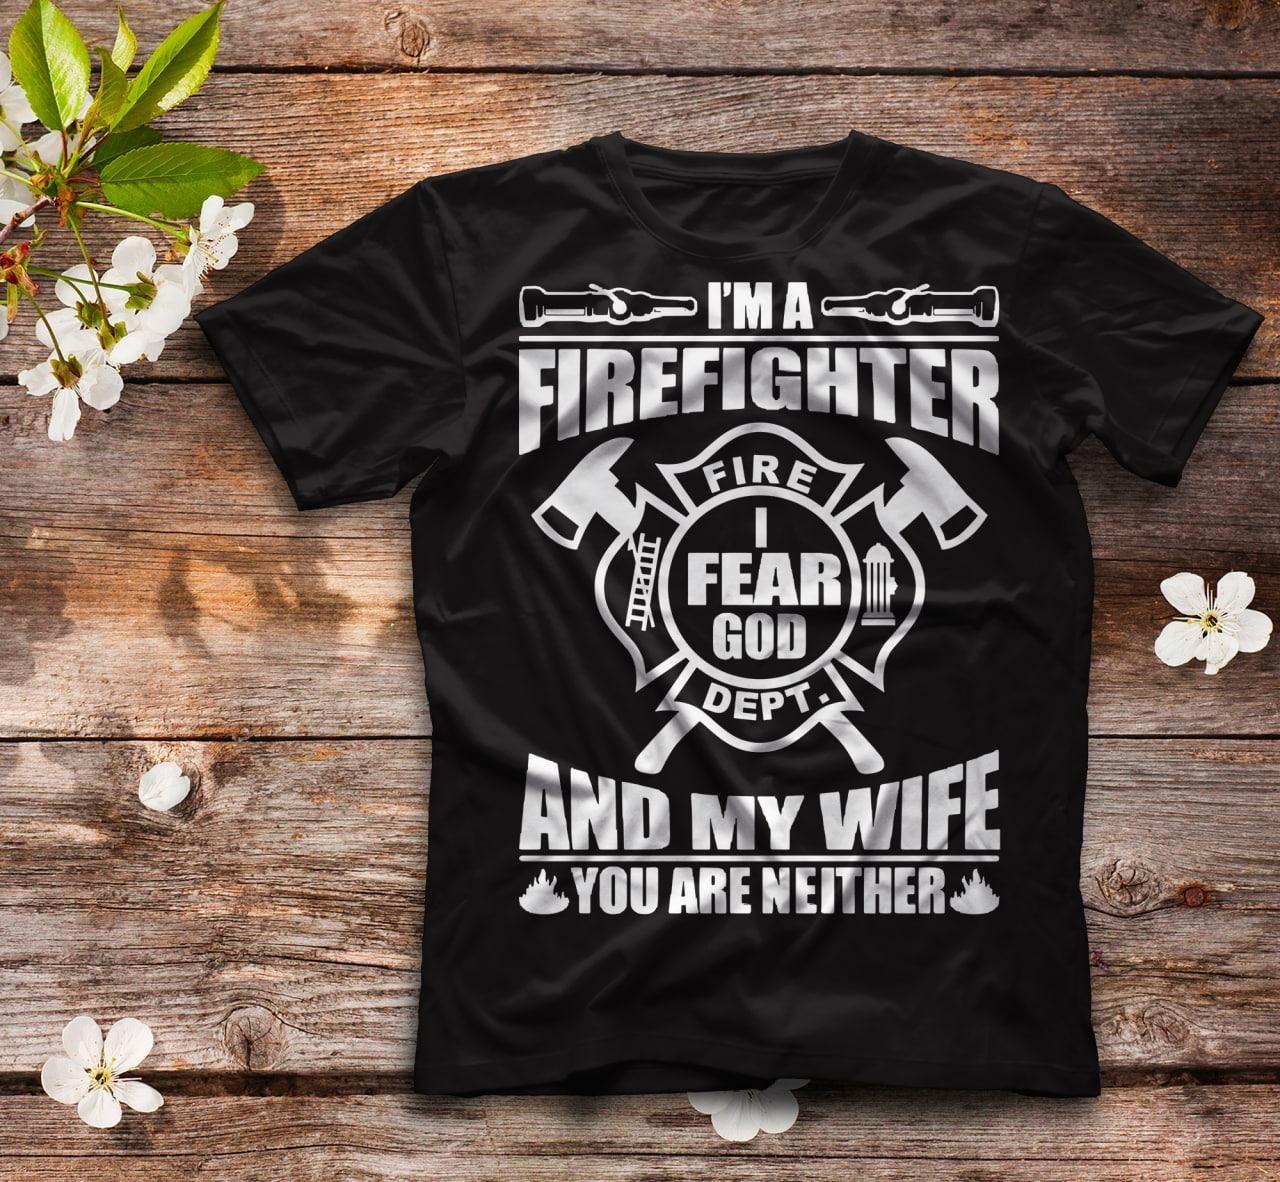 I'm A Firefighter Fire I Fear God Dept And My Wife You Are Neither